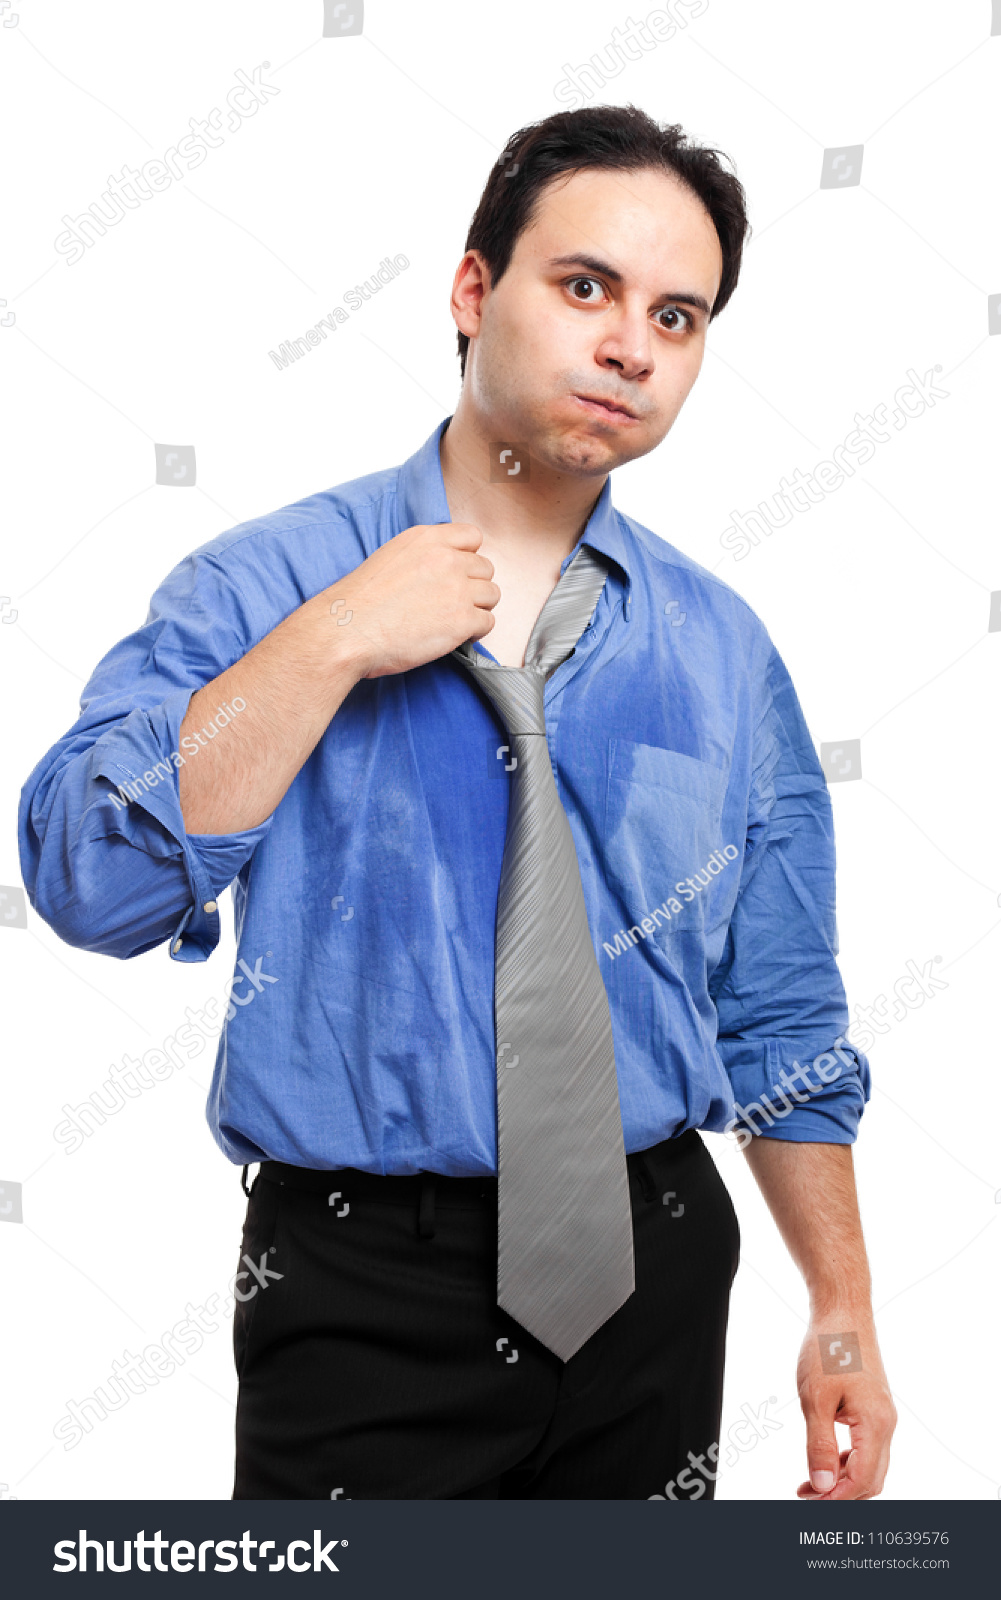 Sweating businessman due to hot climate #110639576